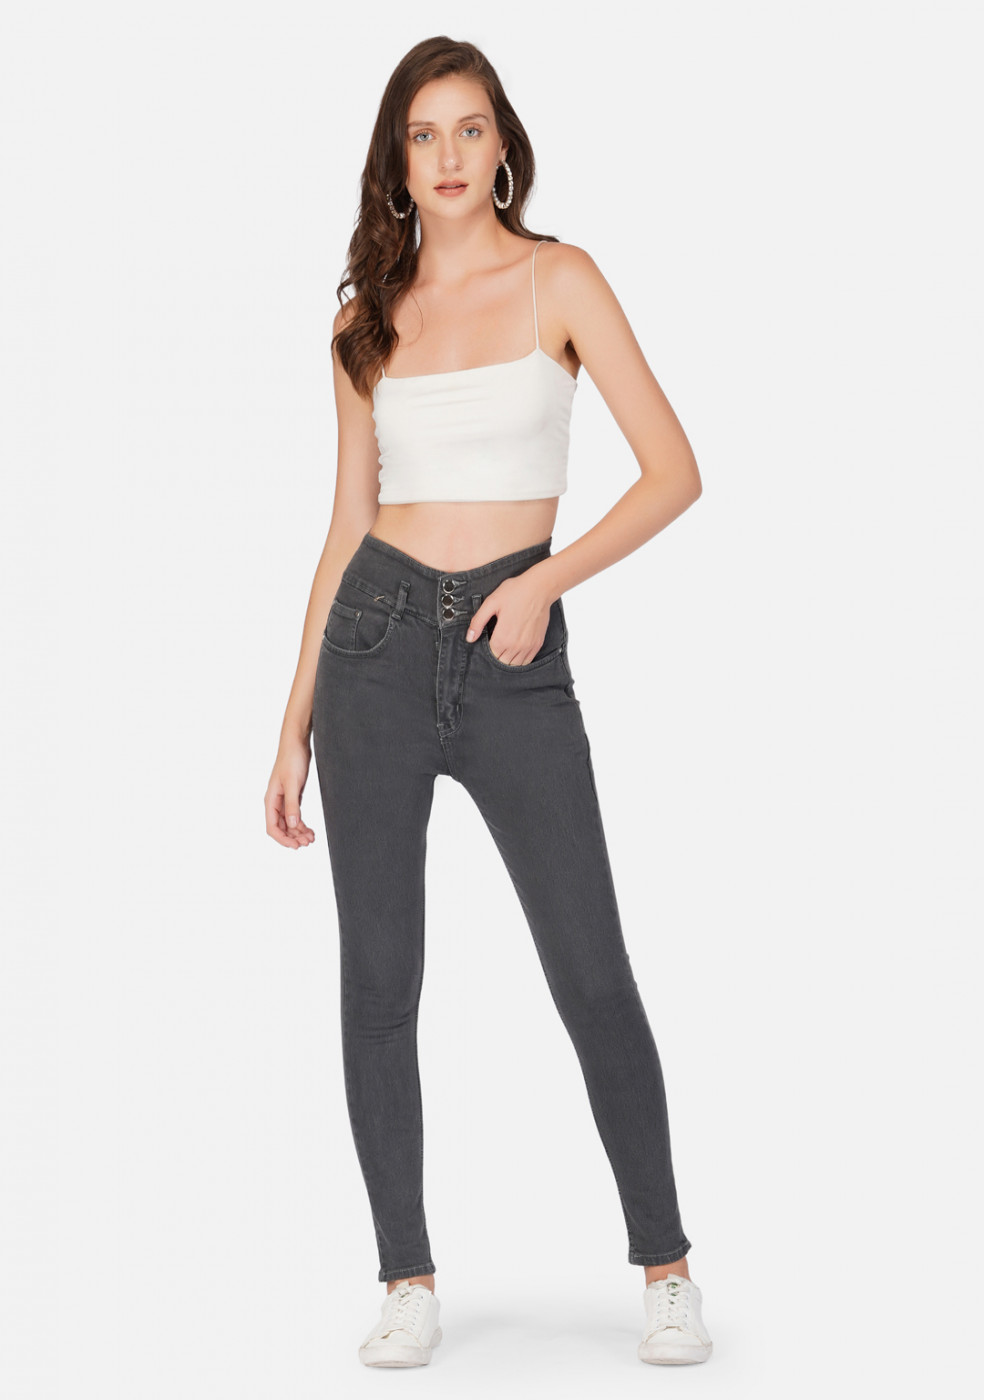 Gray Stretchable Cotton Jeans For Women